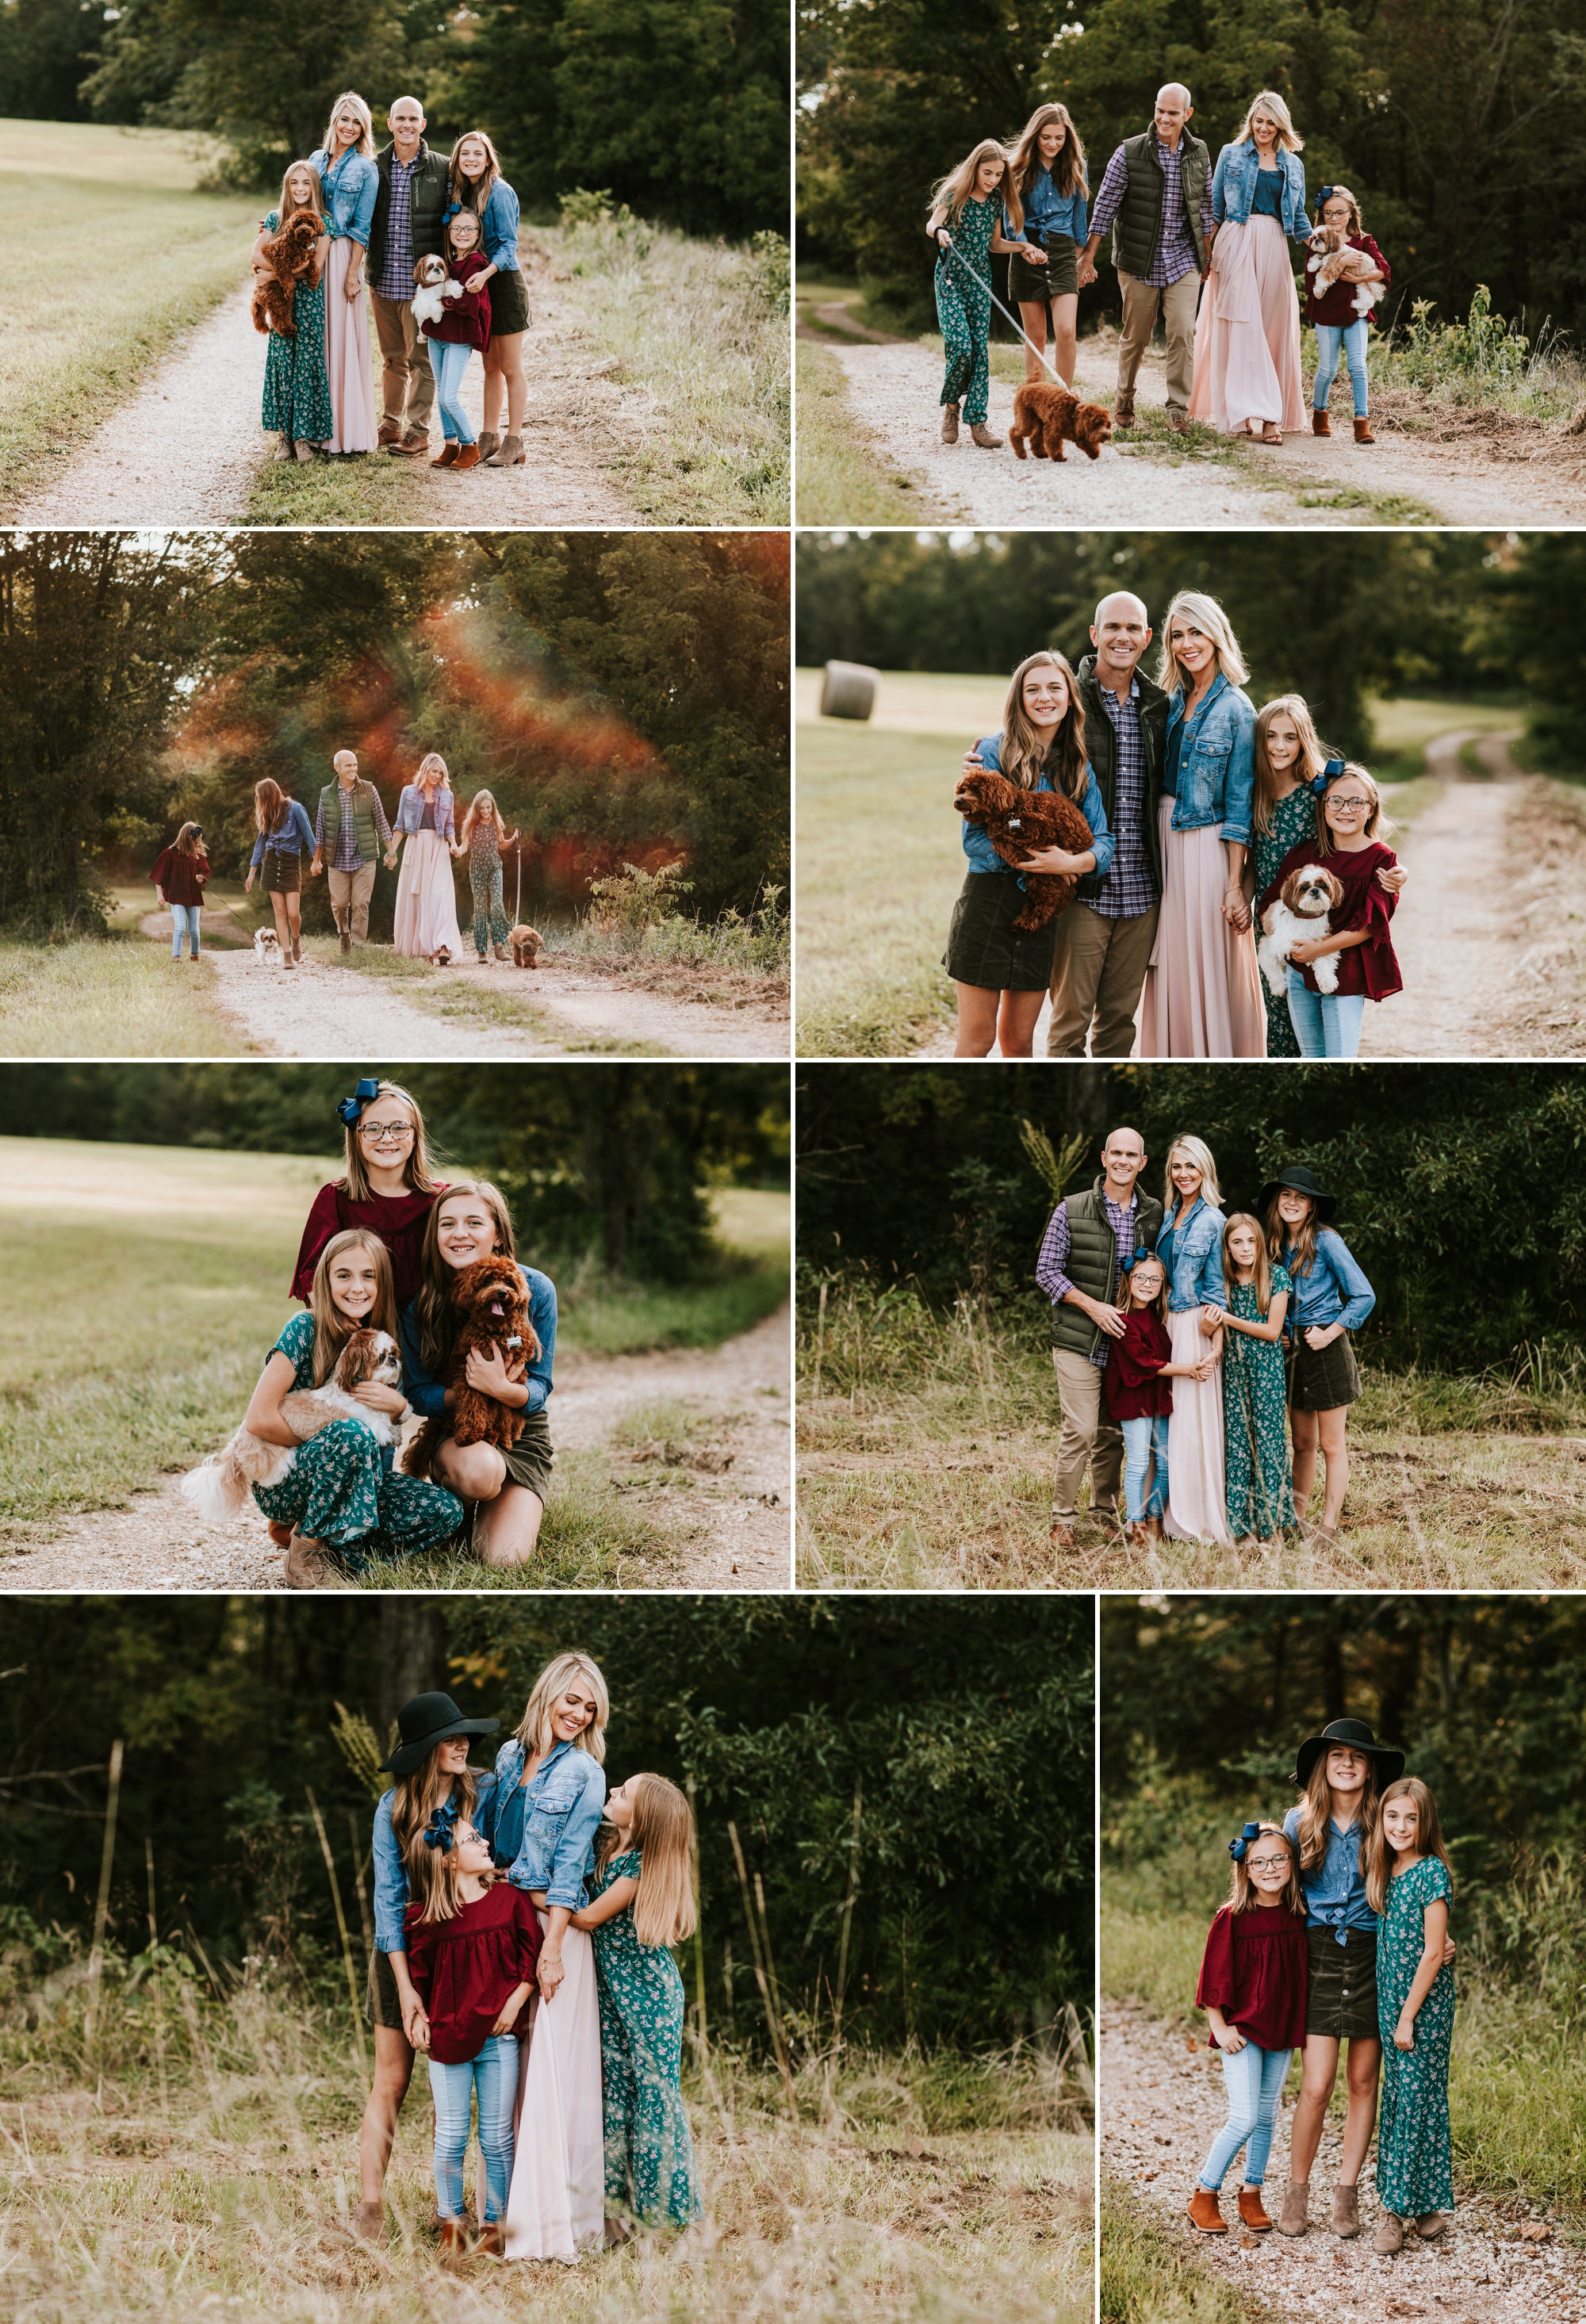 Evening family session with 3 girls and two dogs in a rural setting shot by Dana Marquart at Photogenics on Location.